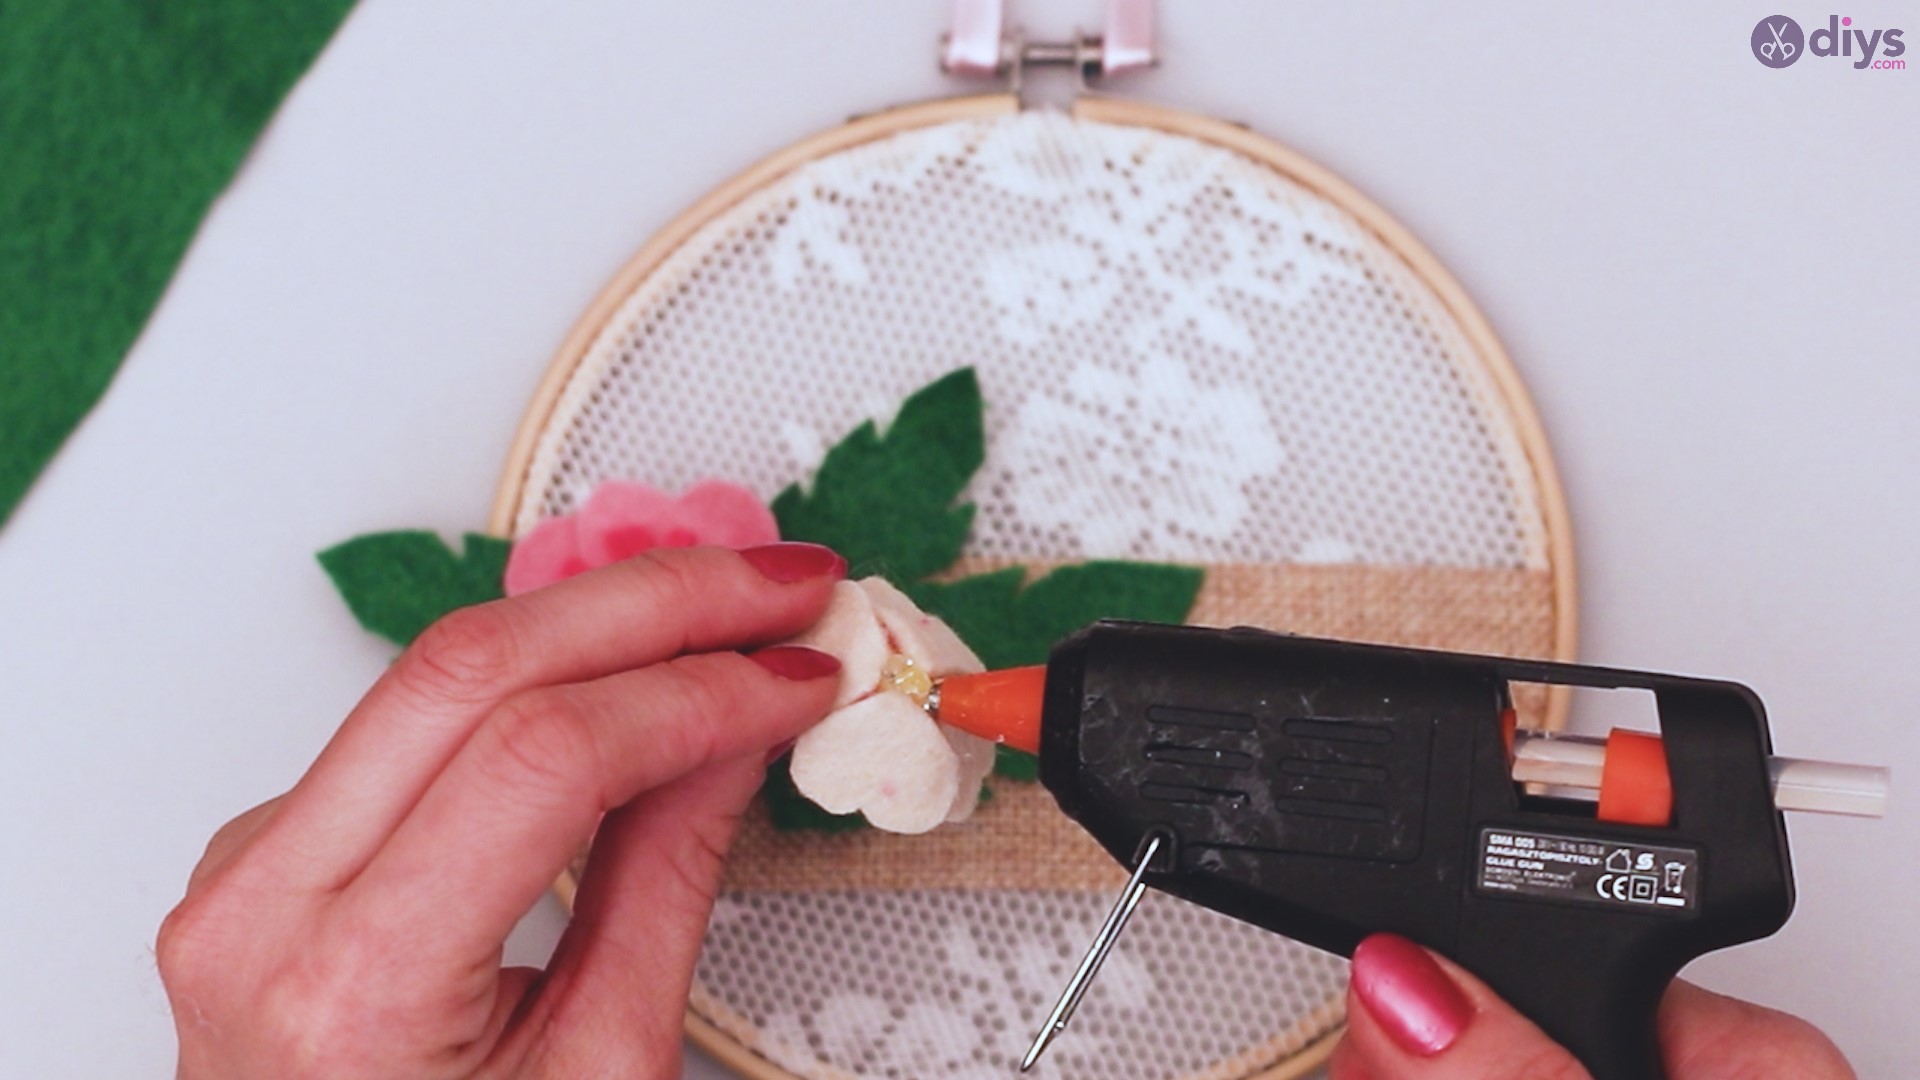 Diy embroidery hoop wall decor tutorial step by step (62)